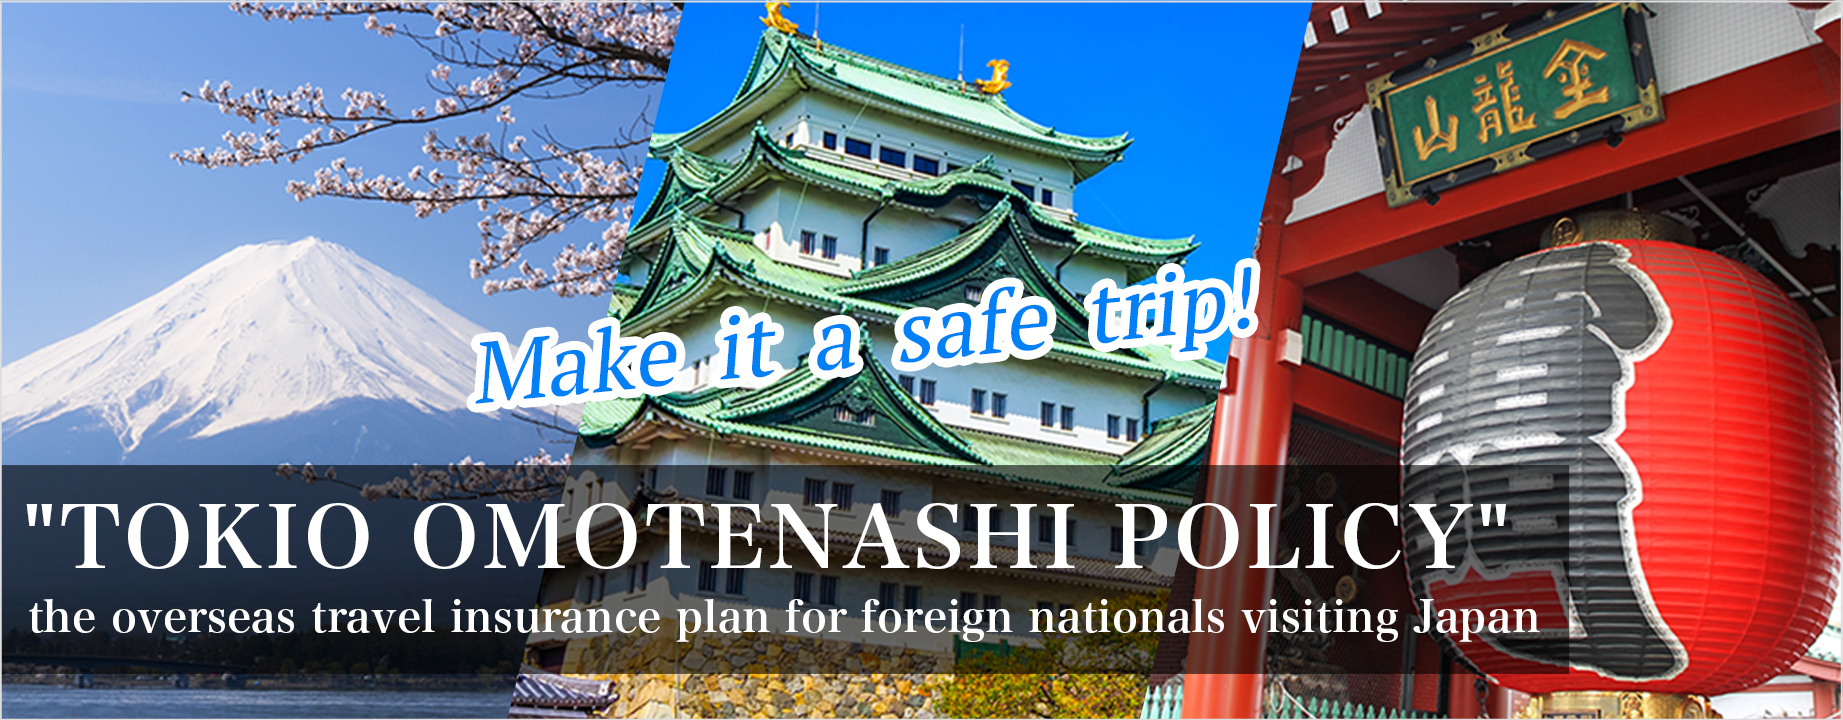 [TOKIO OMOTENASHI POLICY] the overseas travel insurance plan  for foreign nationals visit